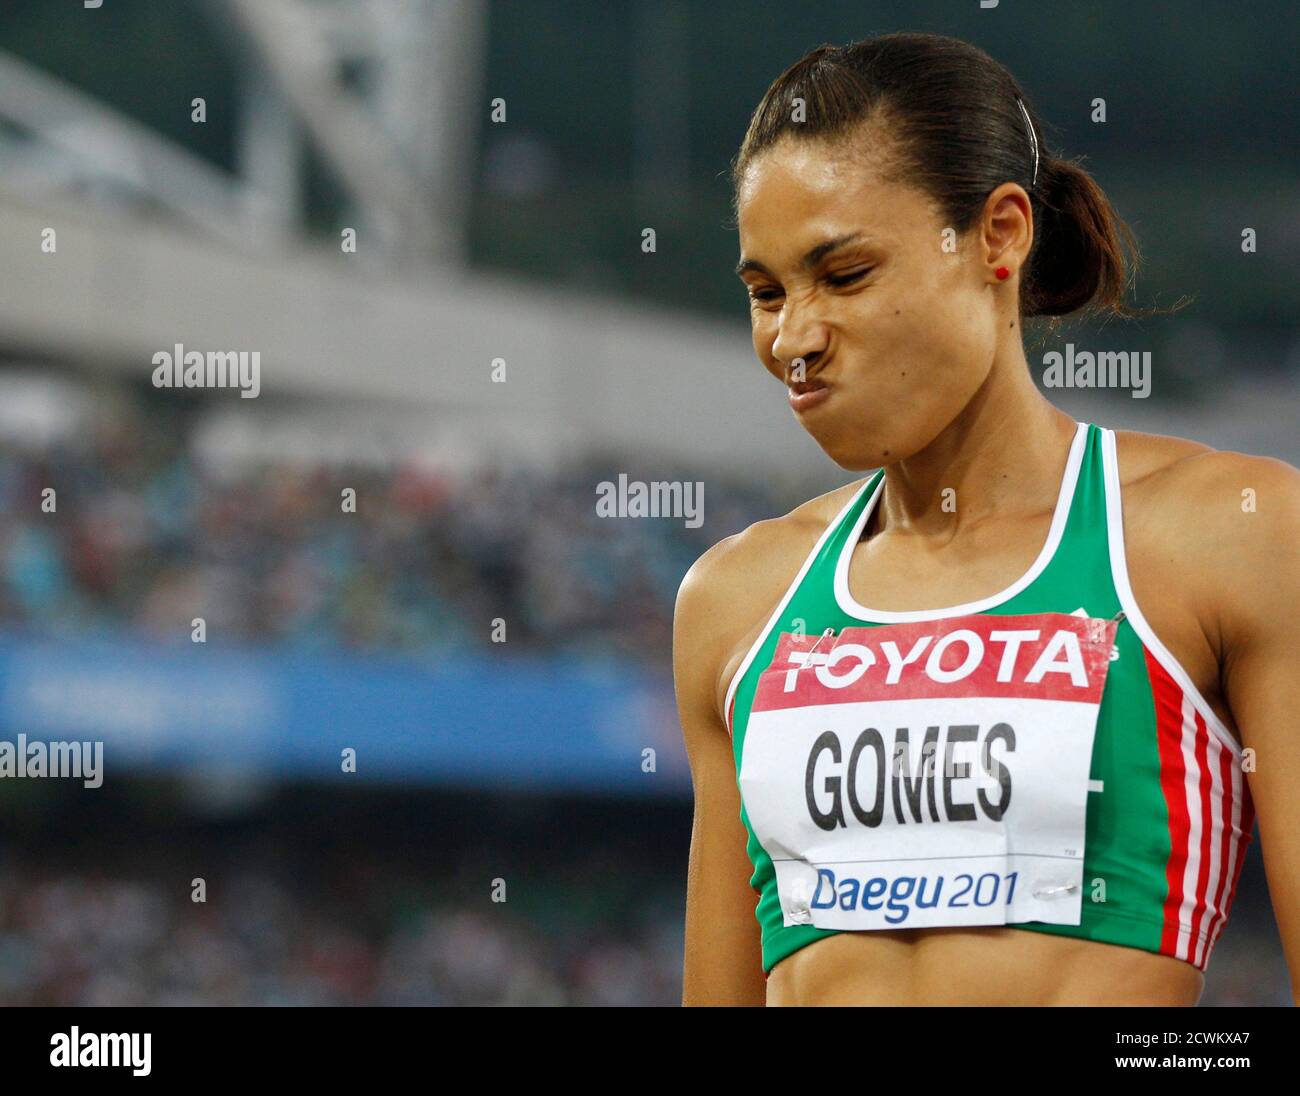 Naide Gomes of Portugal reacts during the women's long jump final at the  IAAF World Championships in Daegu, August 28, 2011. REUTERS/Phil Noble  (SOUTH KOREA - Tags: SPORT ATHLETICS Stock Photo - Alamy